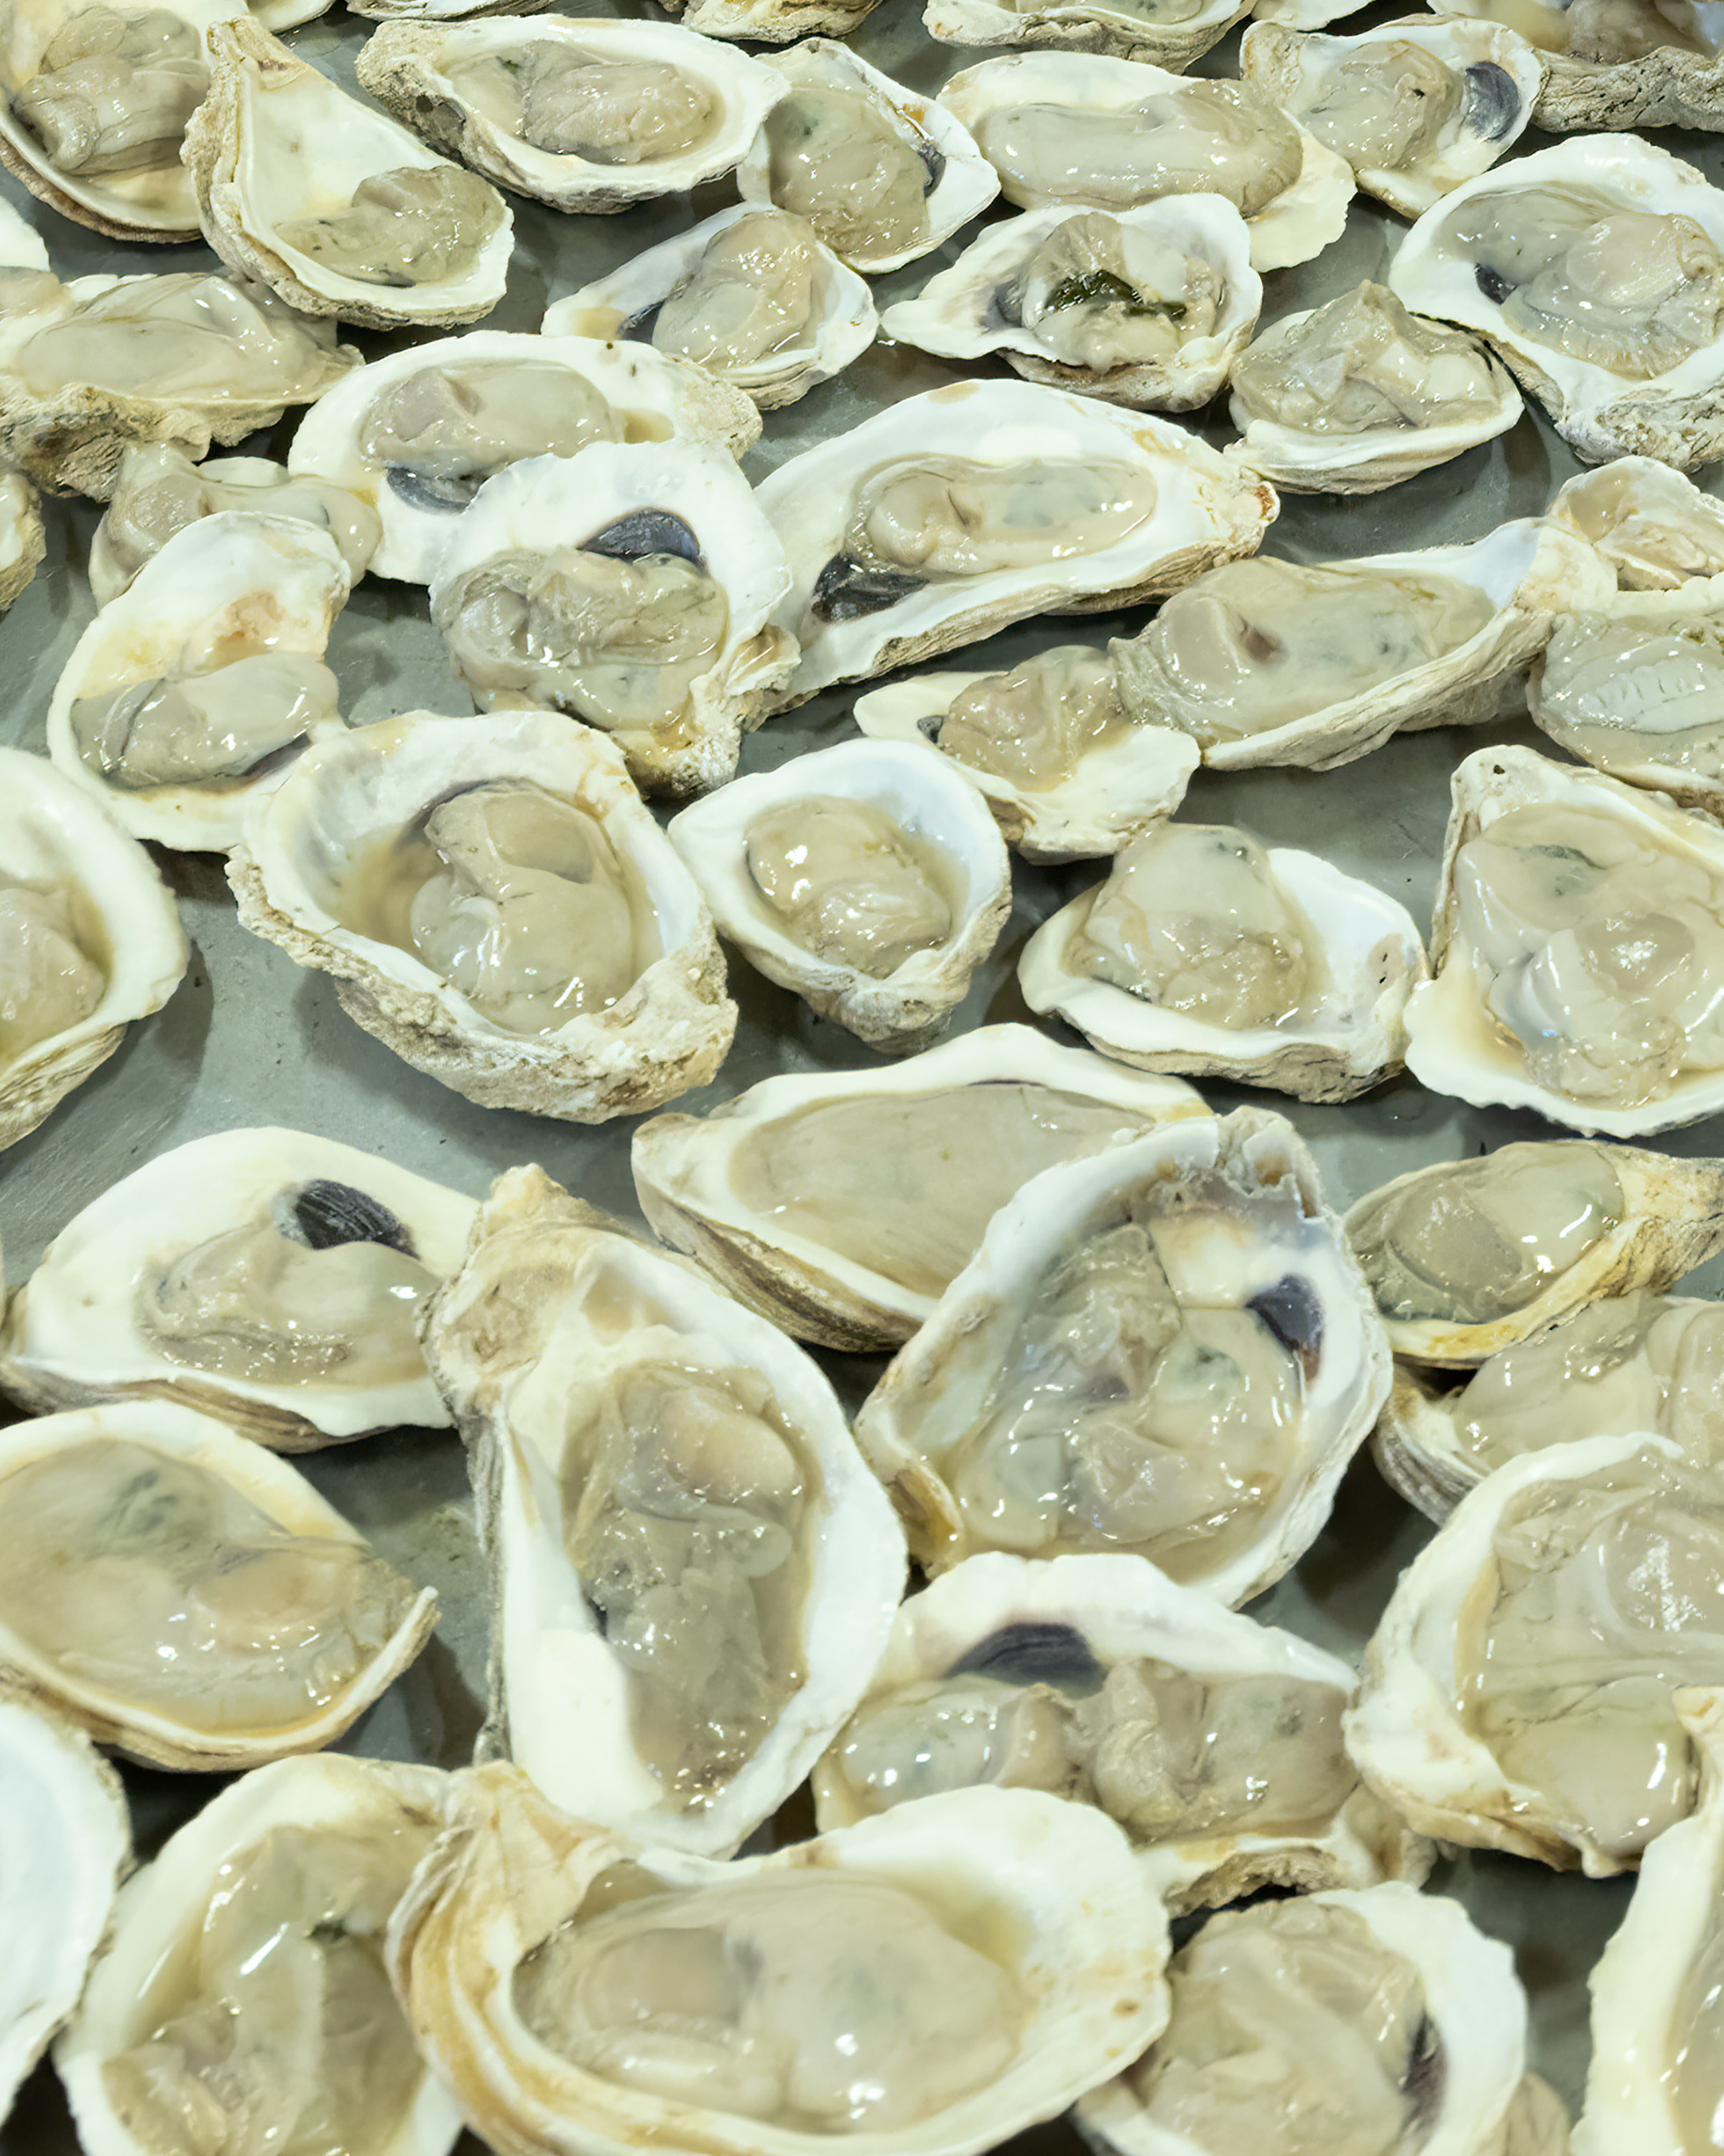 Raw Oysters on the shell